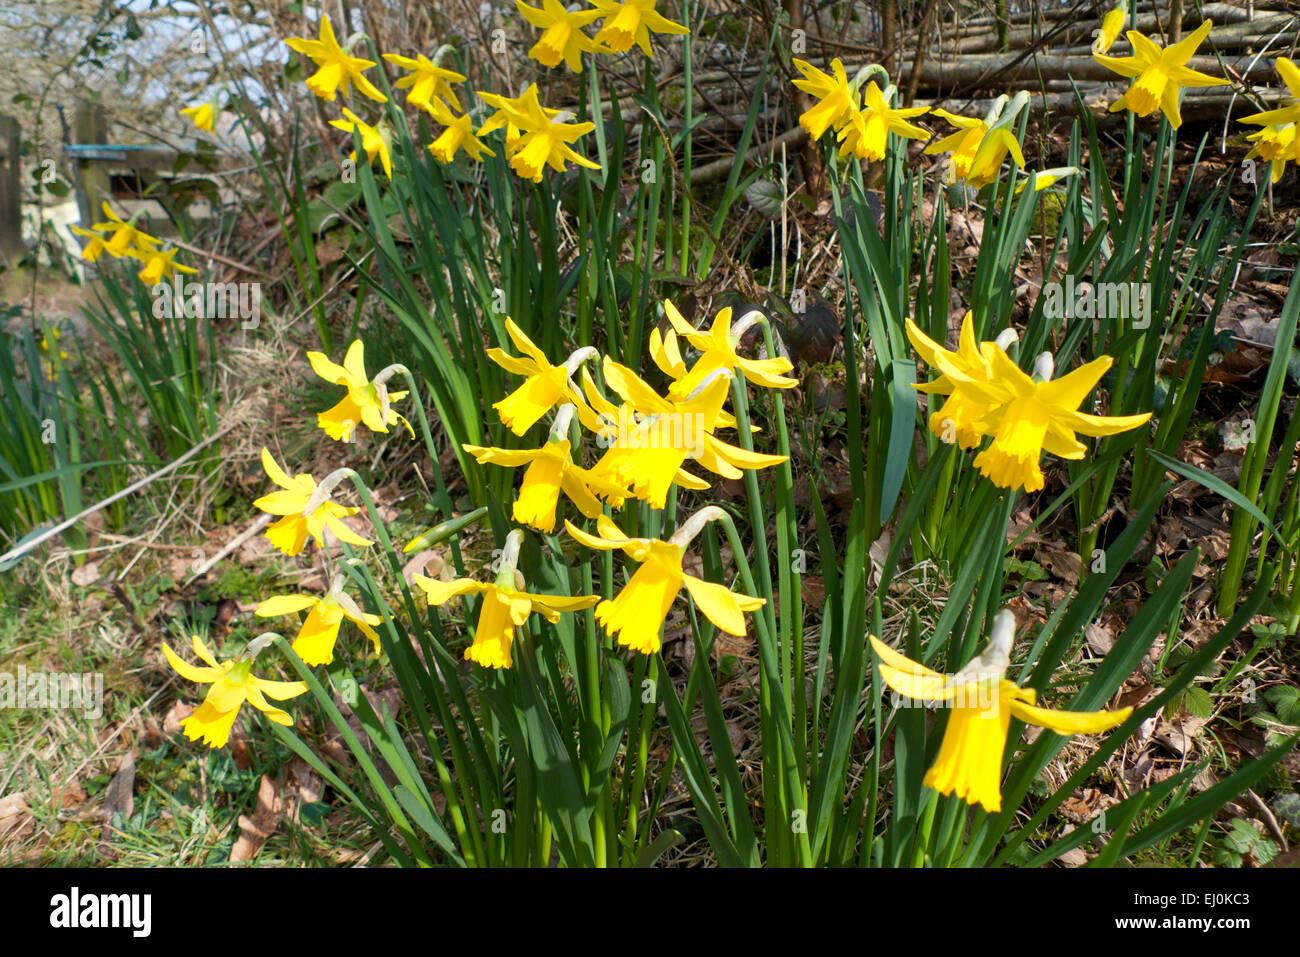 Daffodils blooming in Carmarthenshire, West Wales UK   KATHY DEWITT Stock Photo